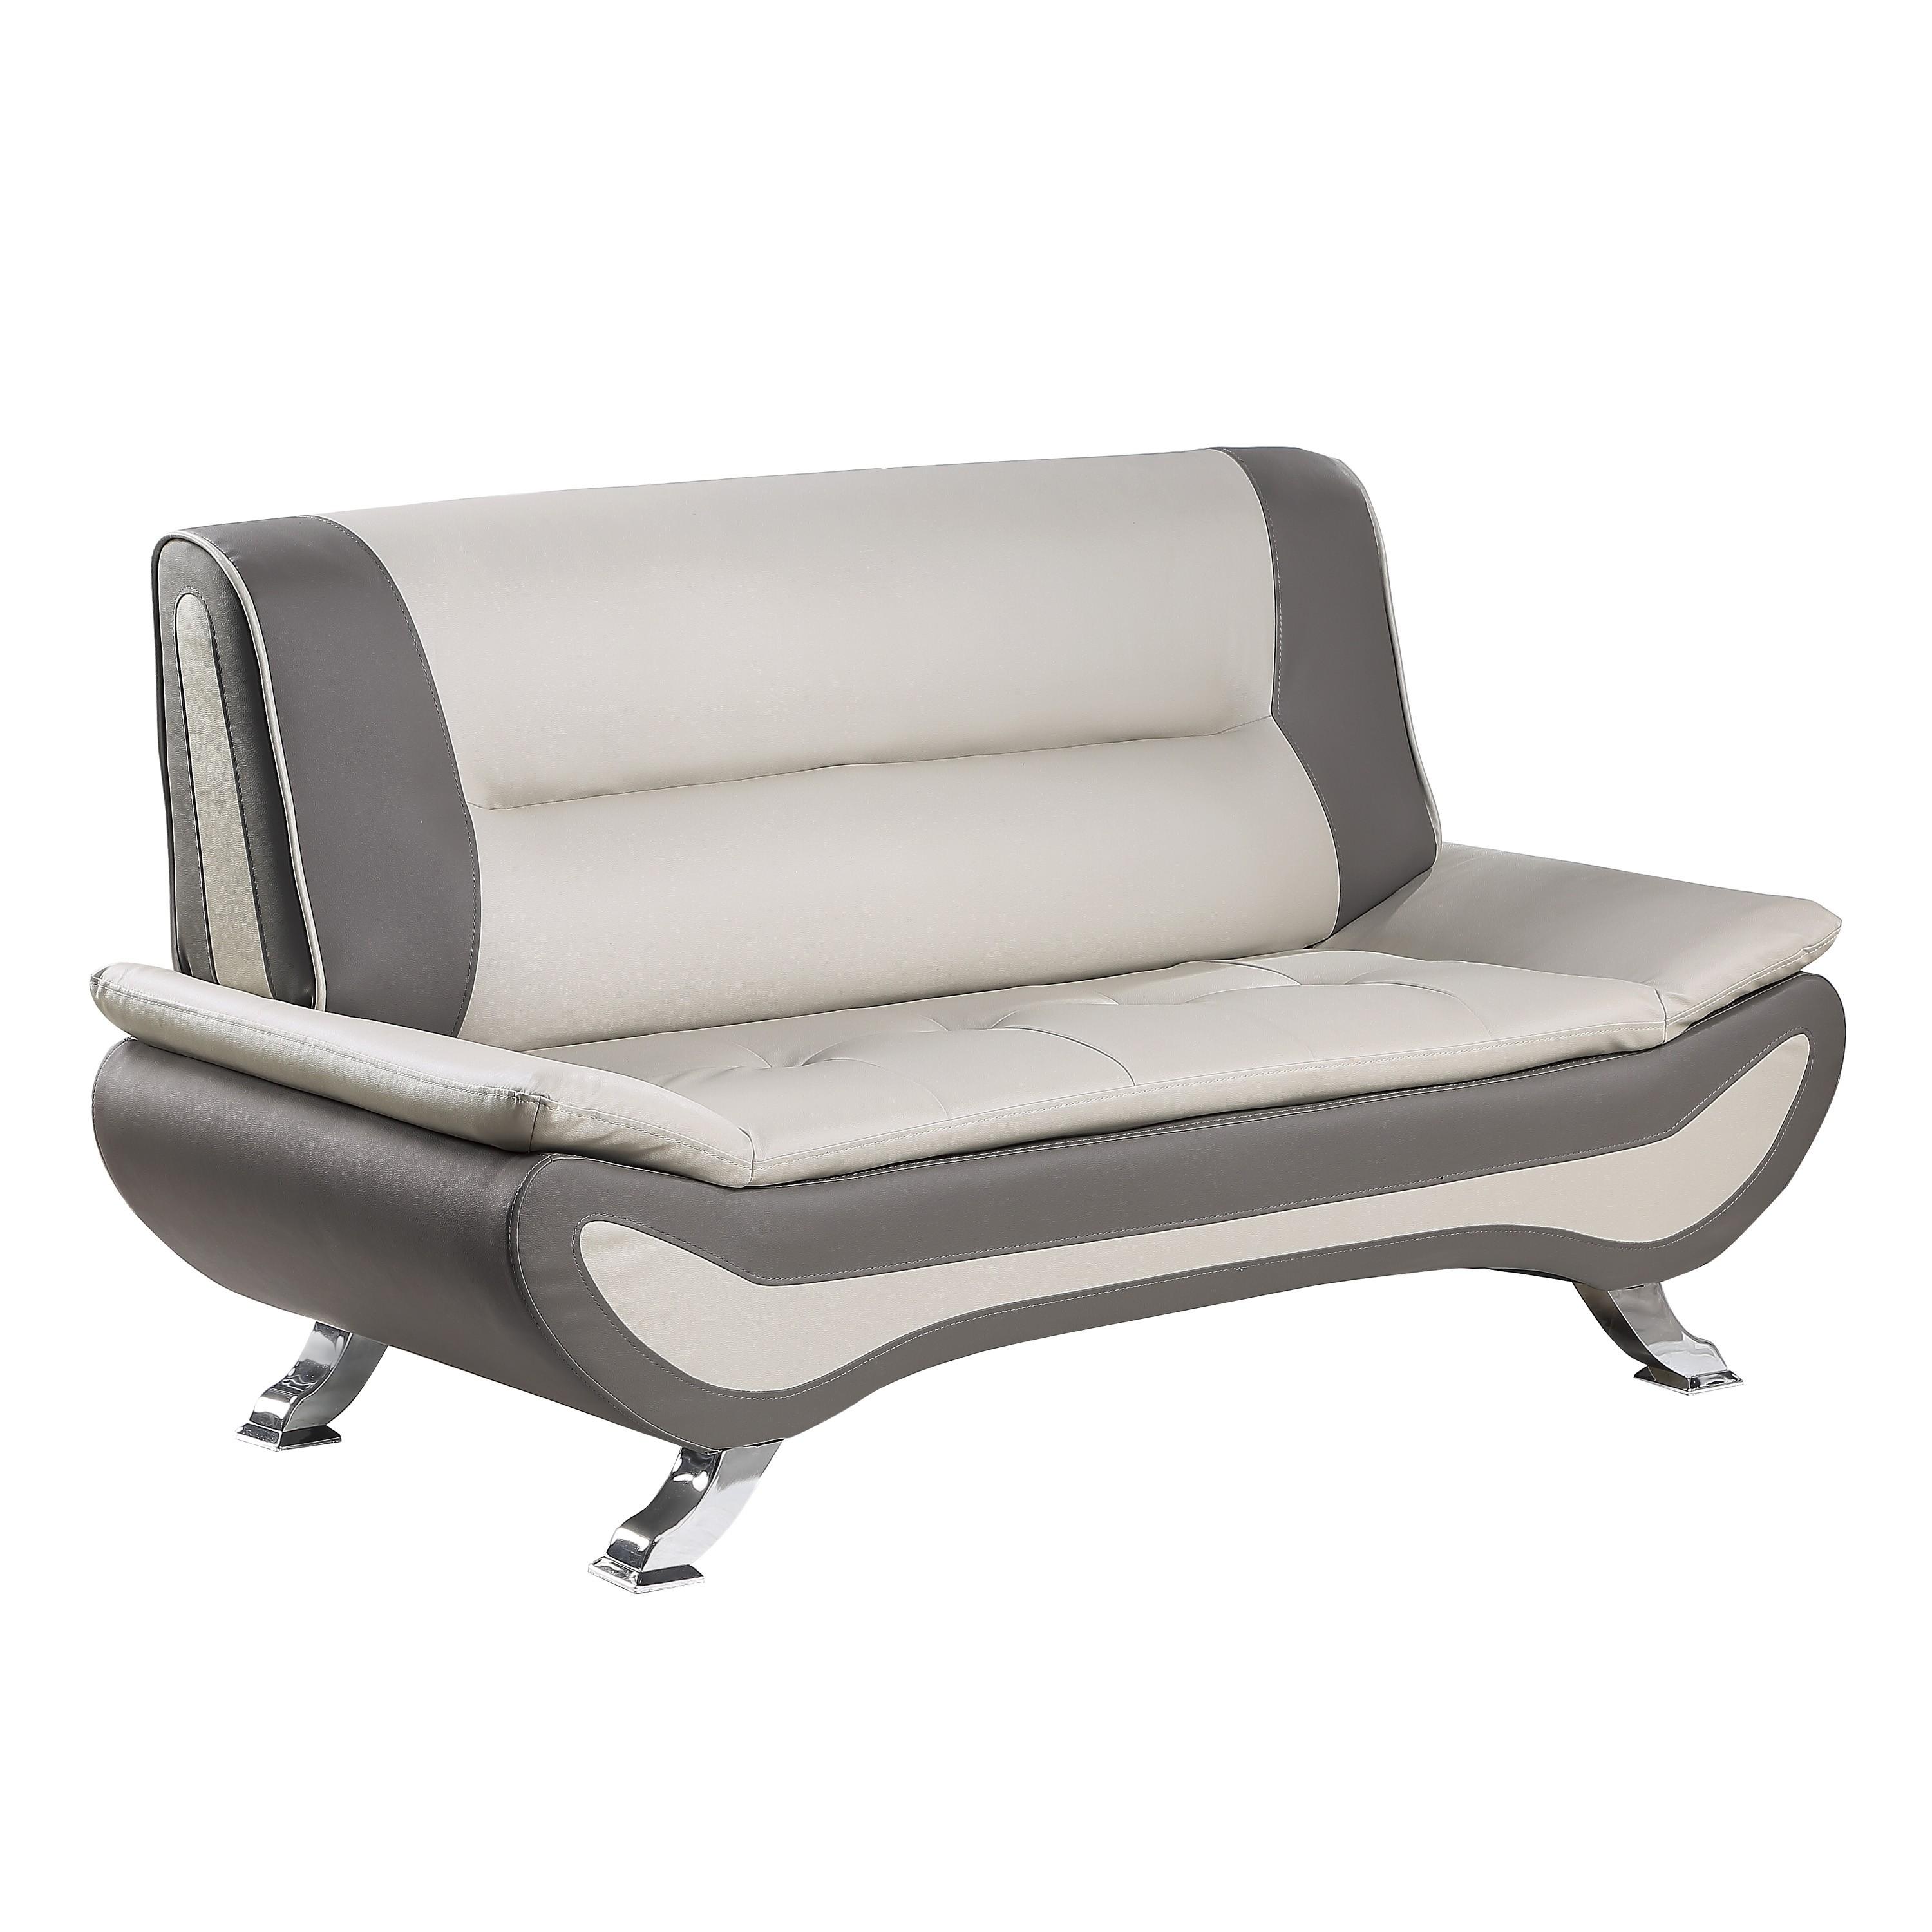 Contemporary Loveseat 8219BEG-2 Veloce 8219BEG-2 in Gray, Beige Faux Leather